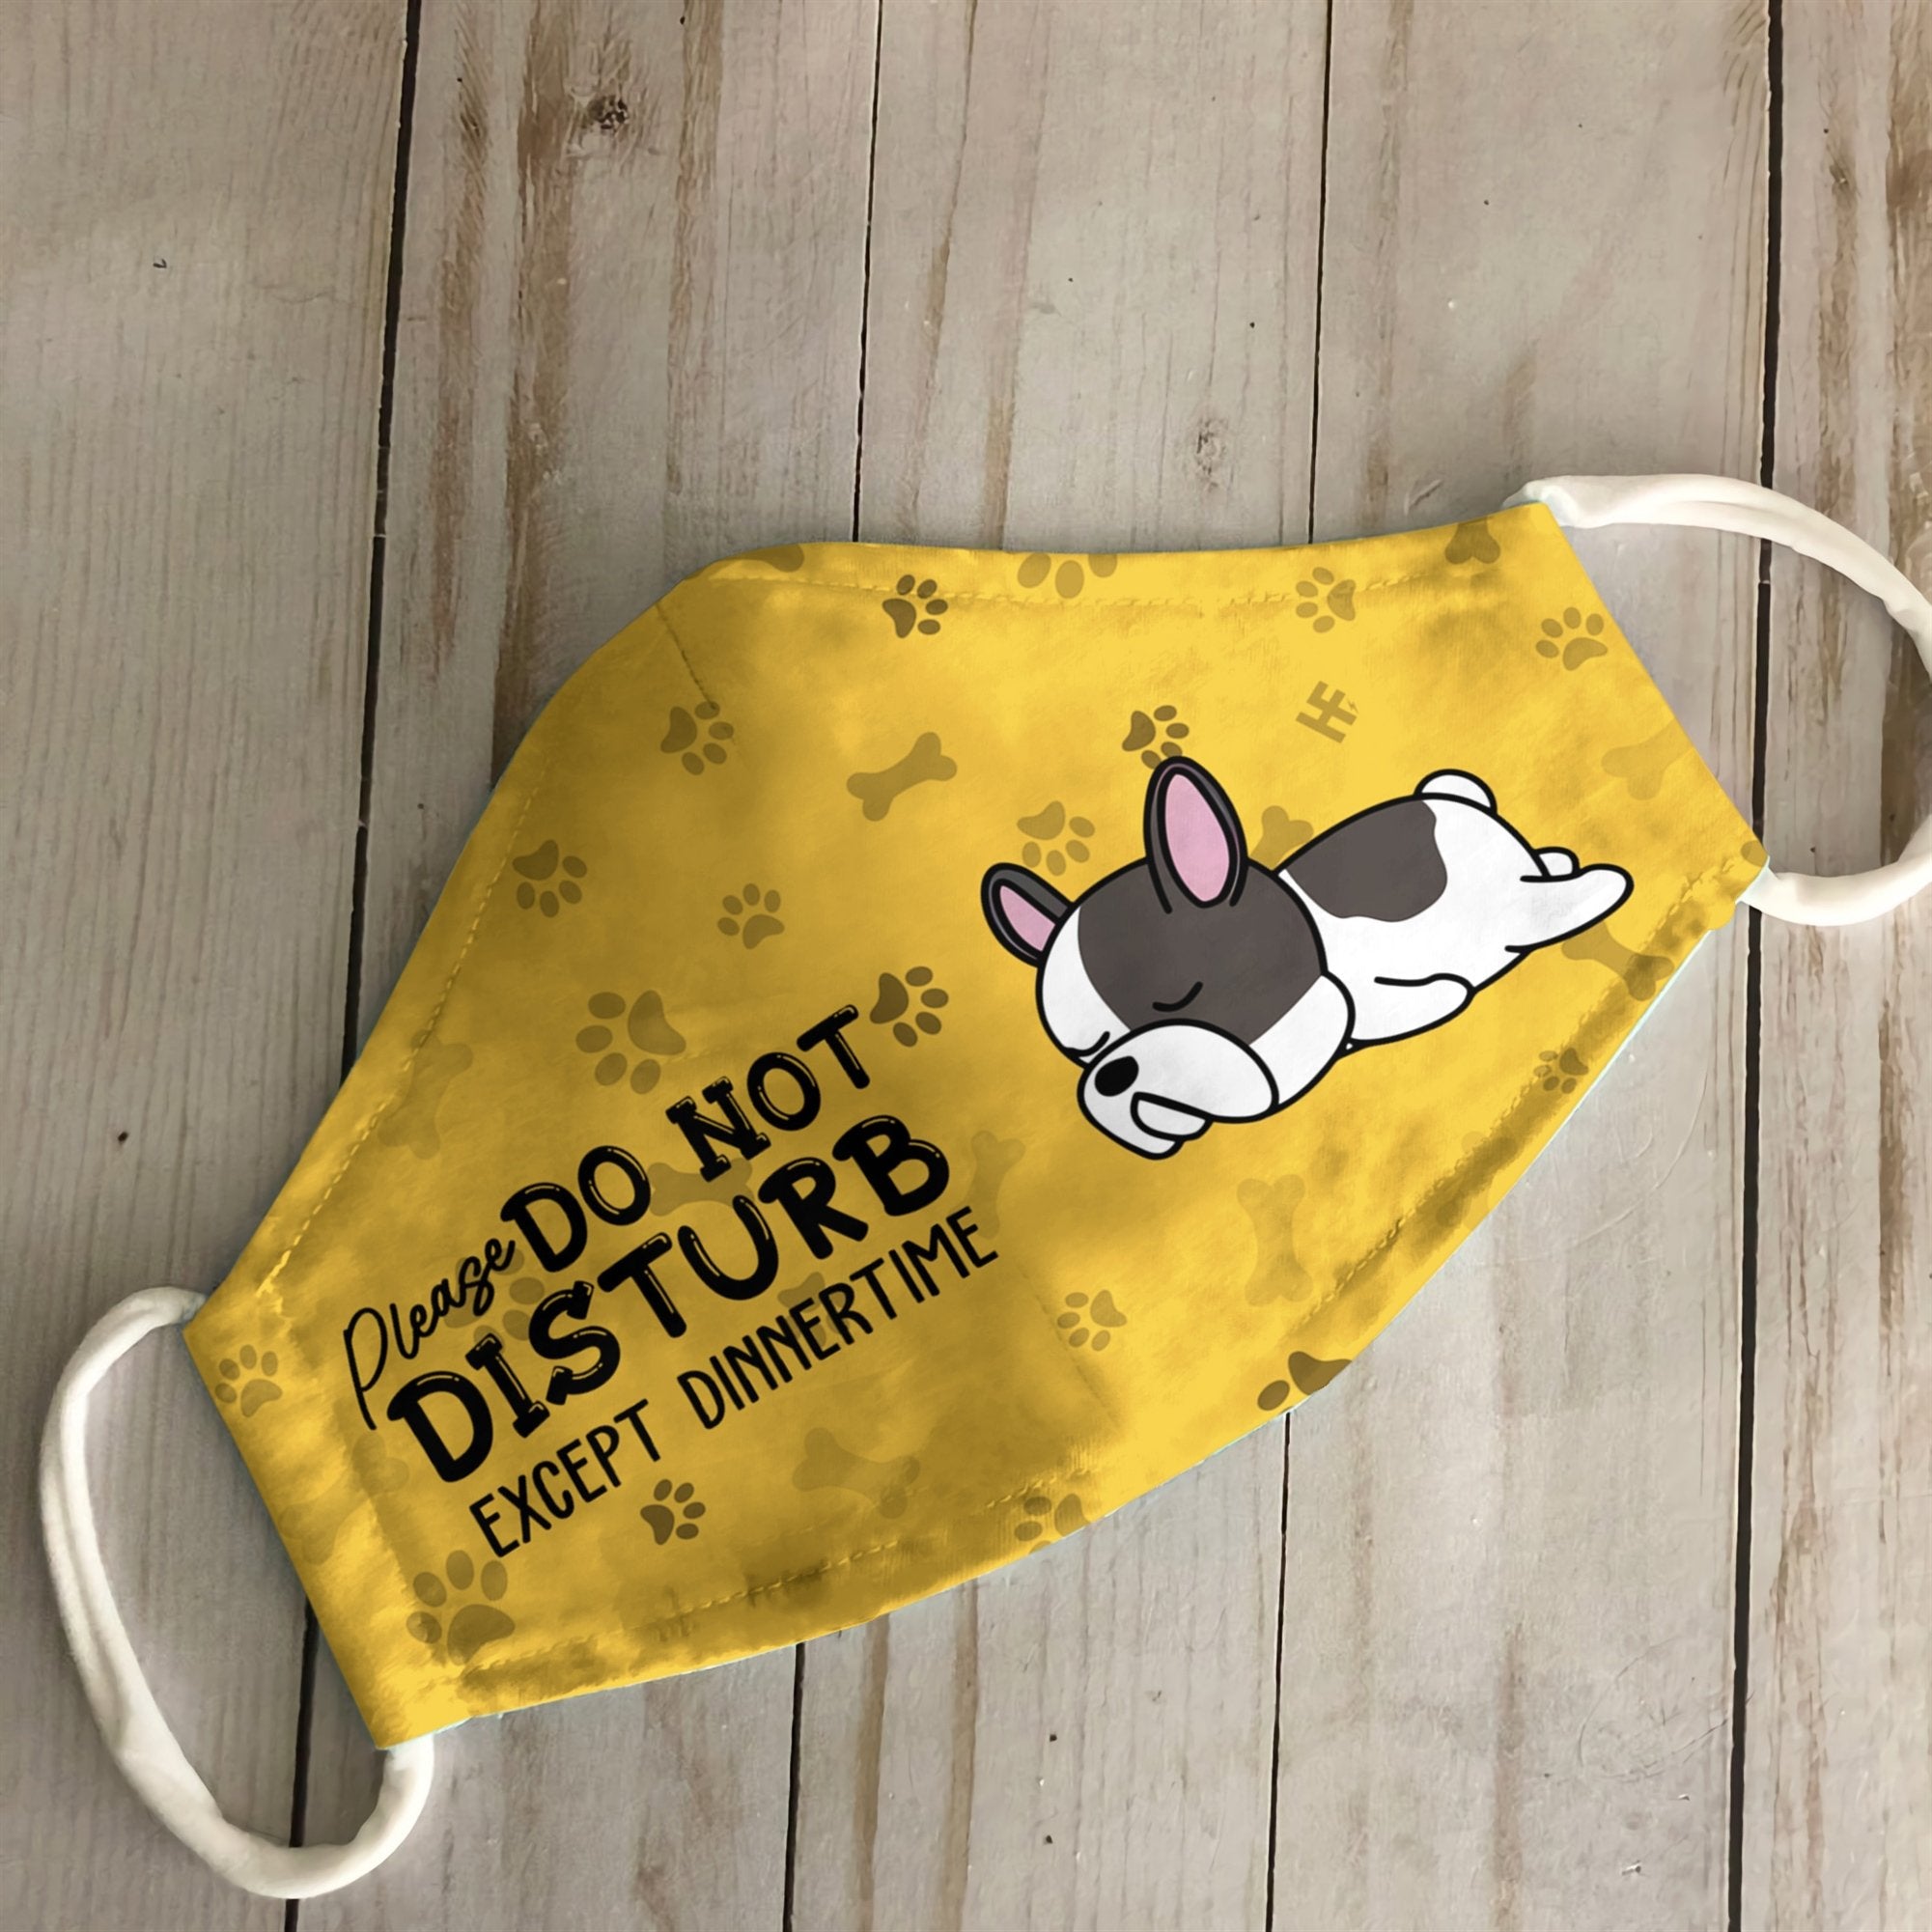 Please Do Not Disturb Except Dinnertime French Bulldogs Yellow EZ16 0807 Face Mask